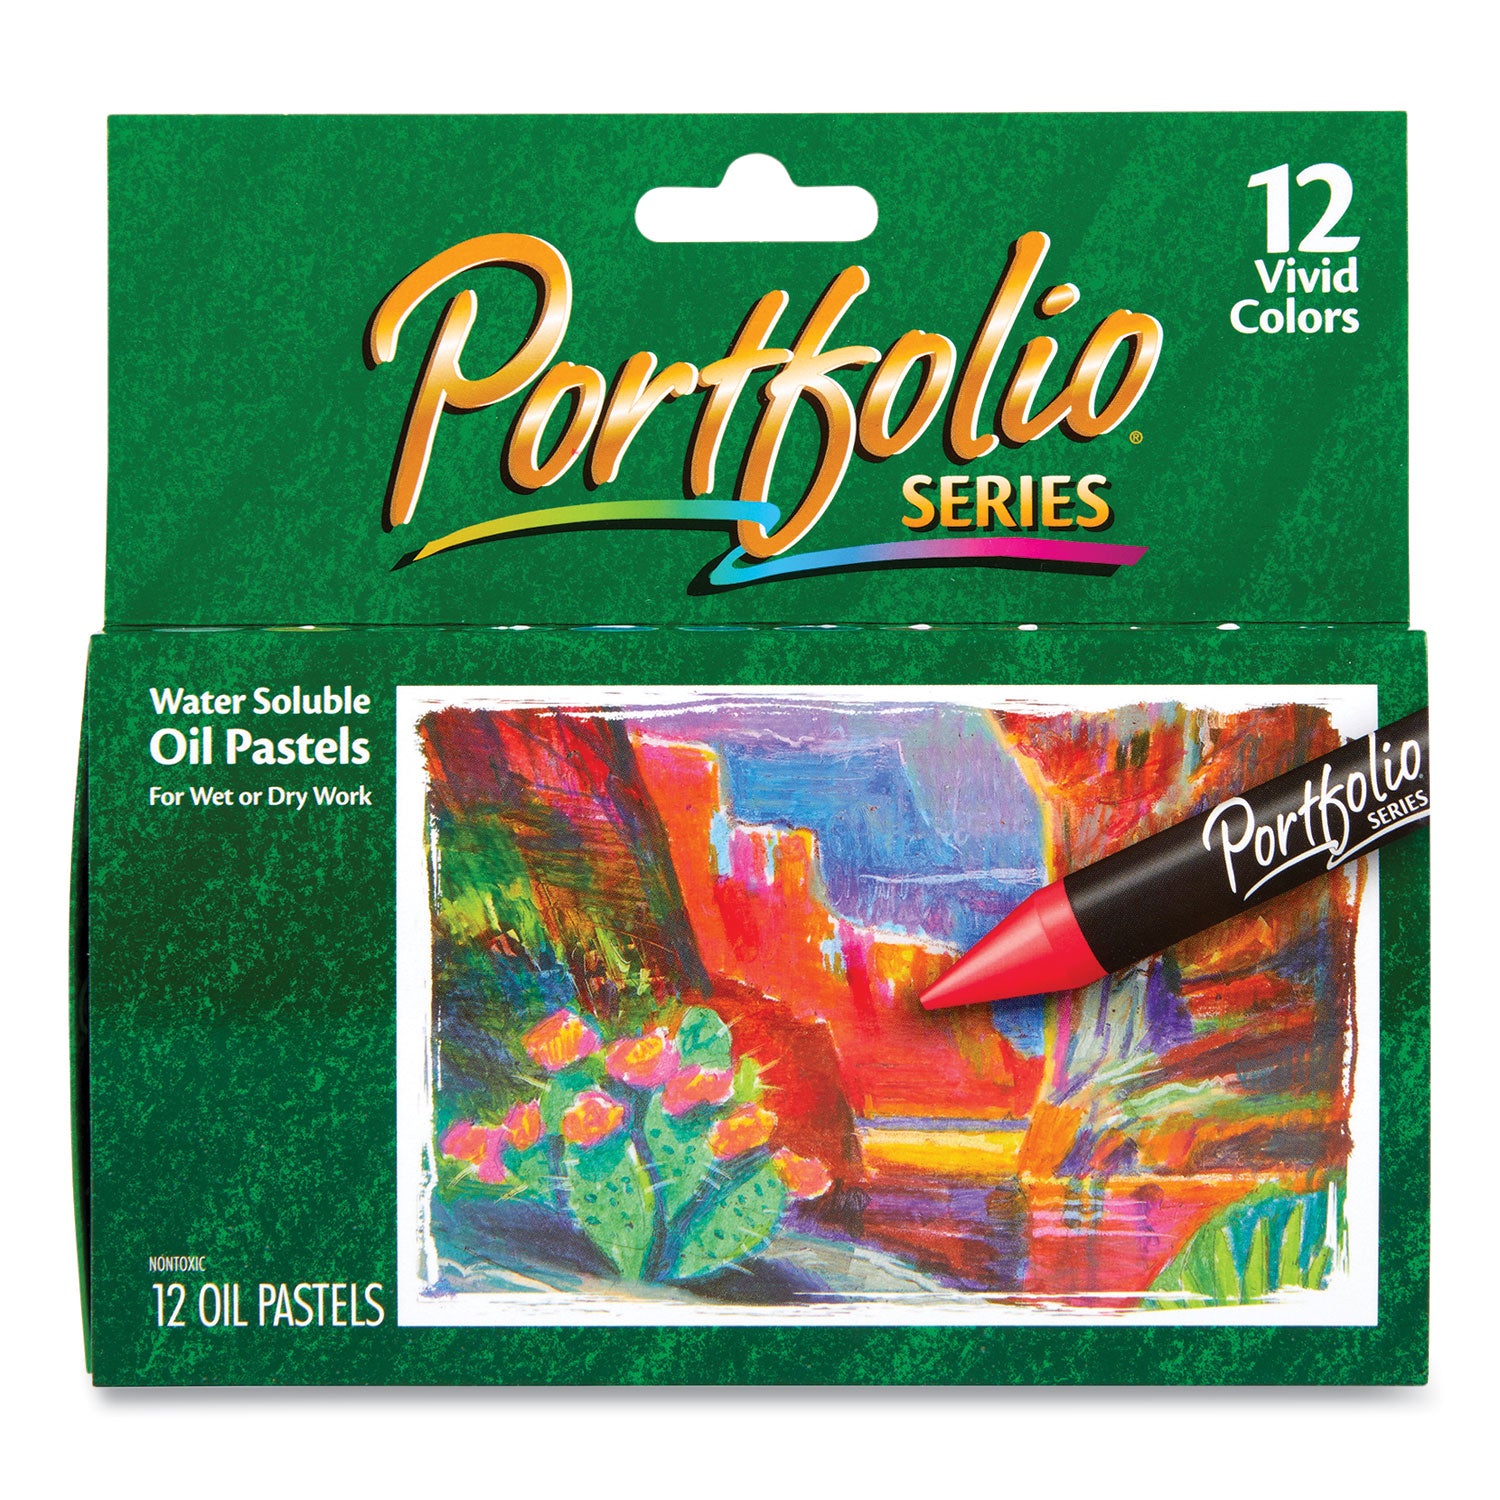 portfolio-series-oil-pastels-12-assorted-colors-12-pack_cyo523612 - 1